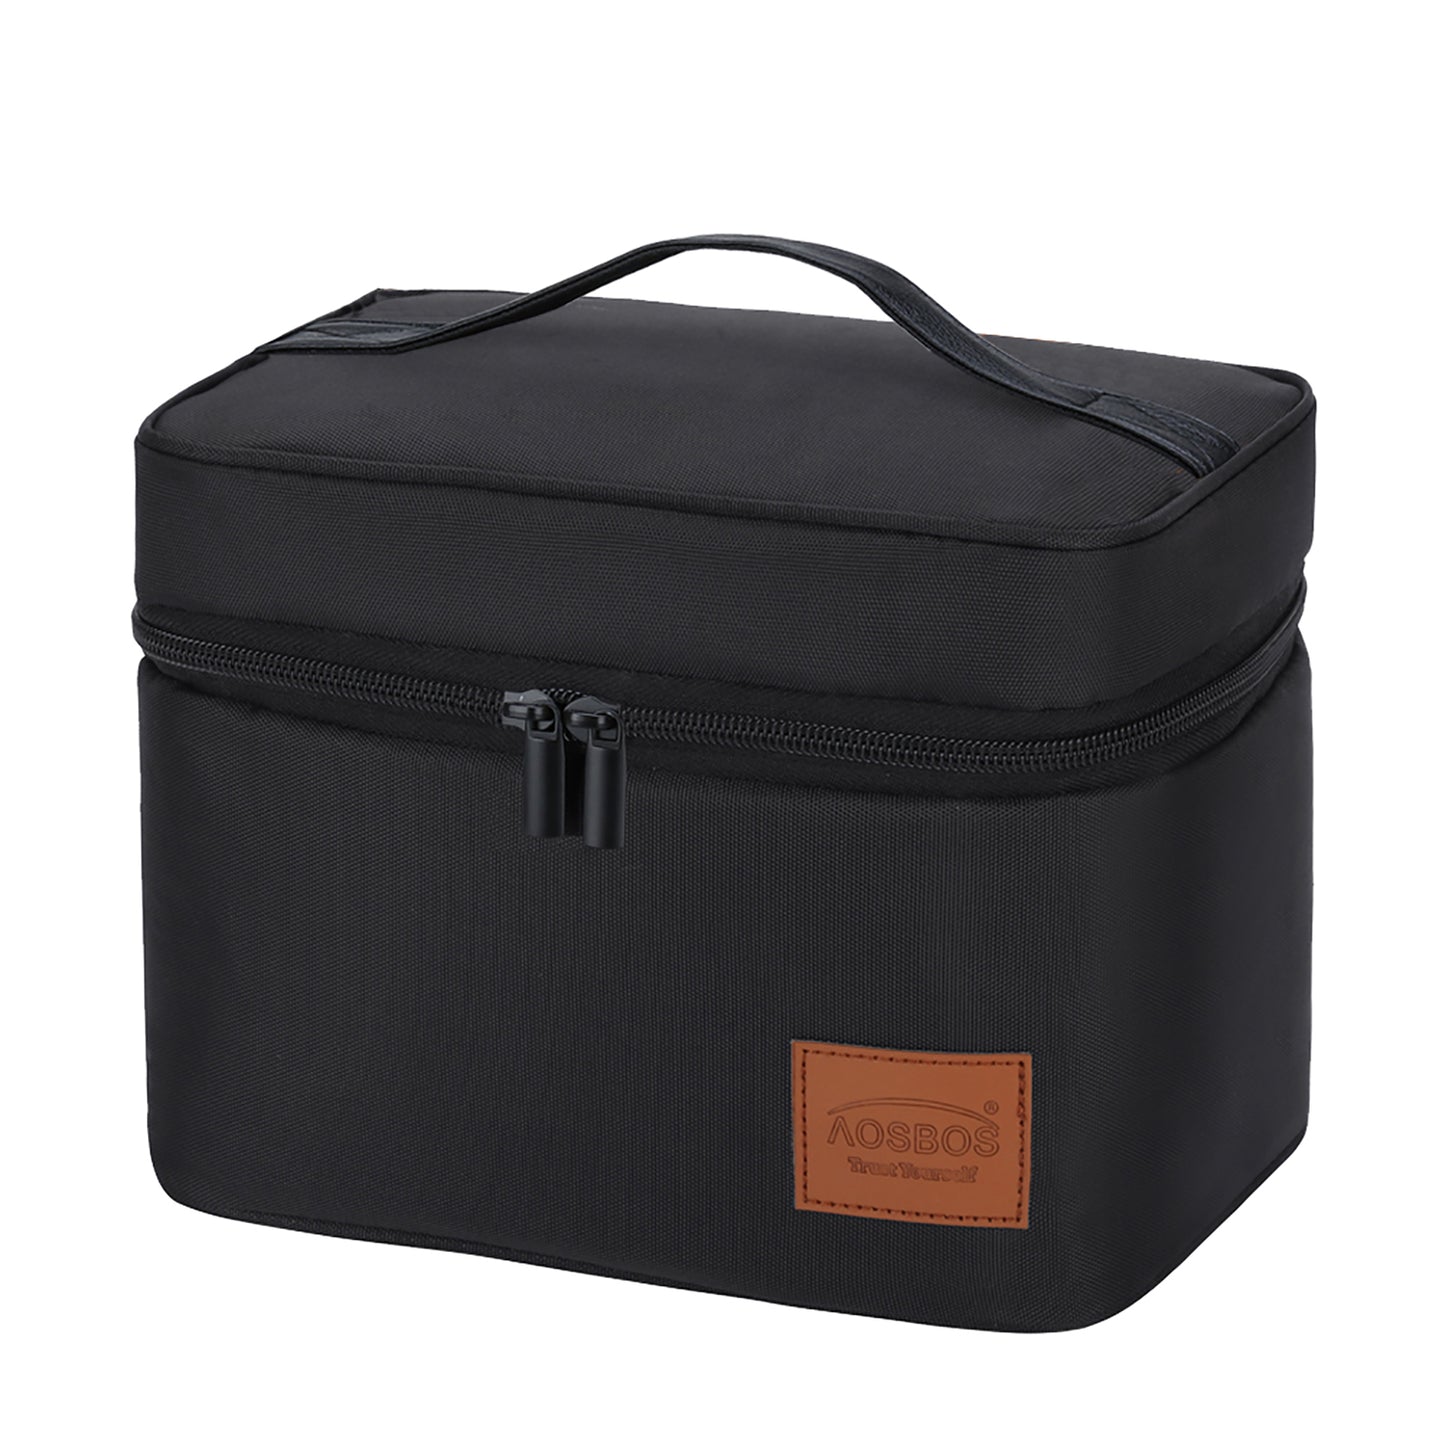 Portable Smart Insulated Thermal Black Cooler Bag Mini Lunch Box